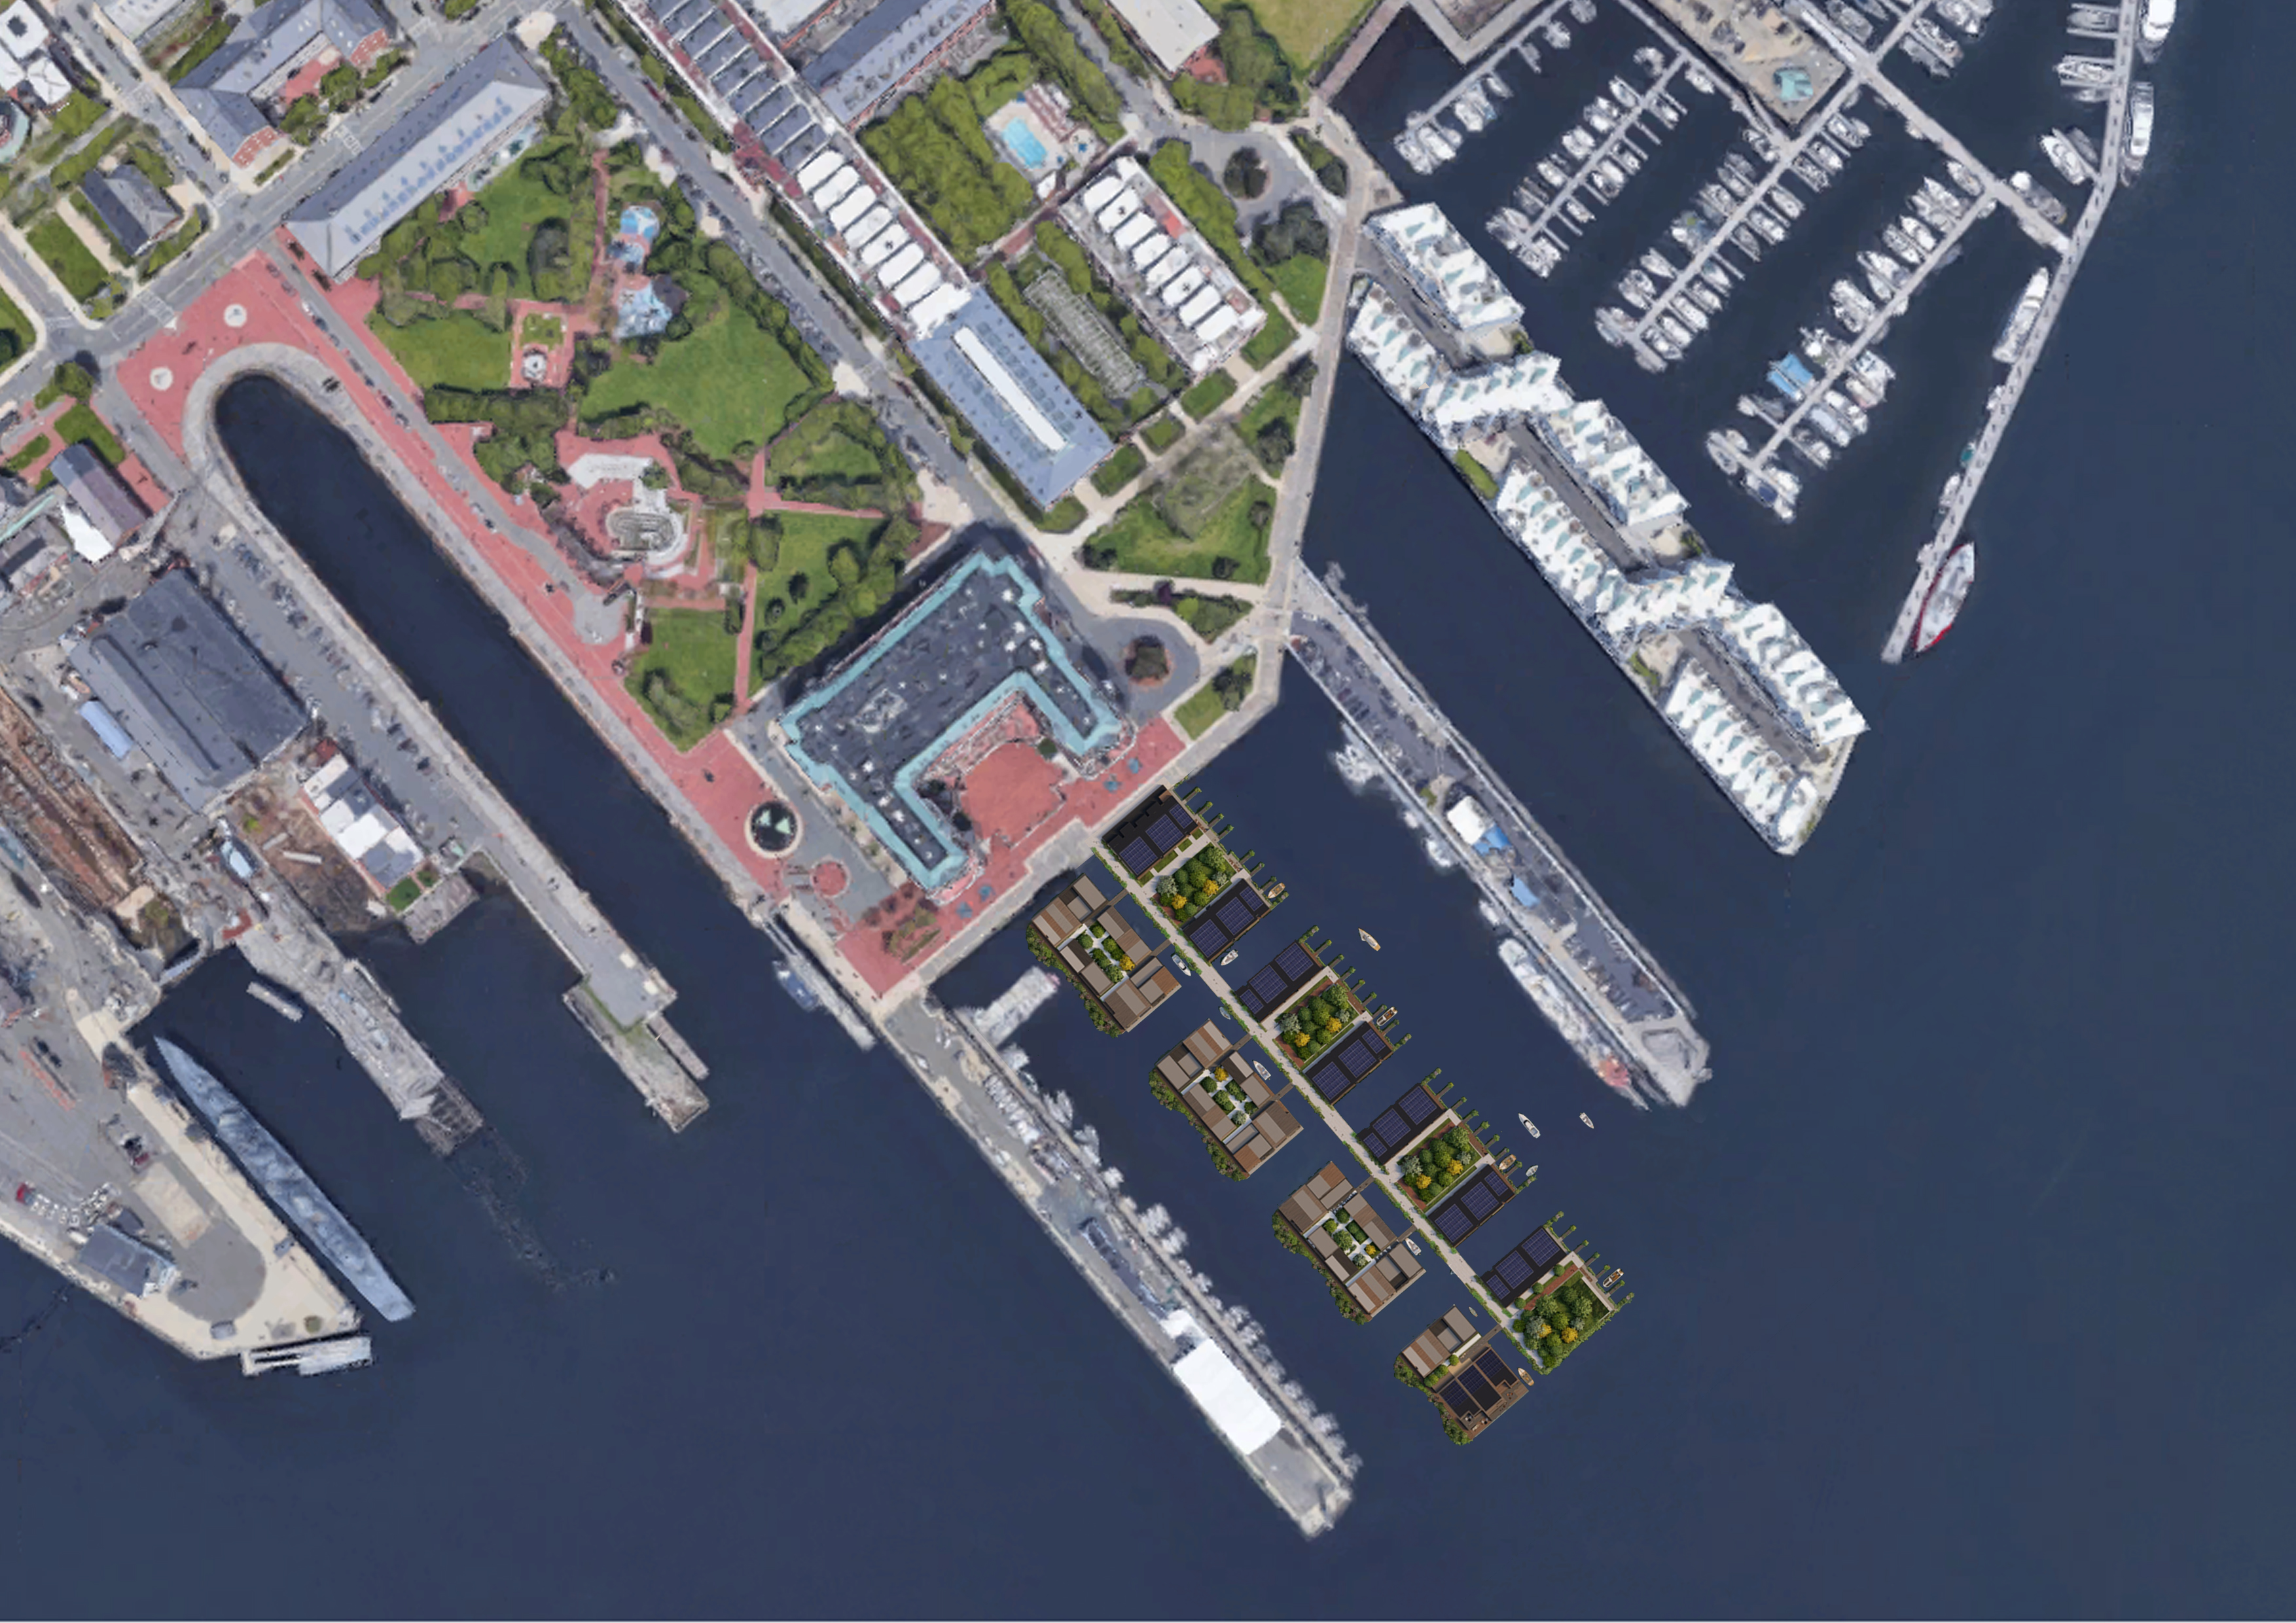 Satellite view of Pier 5 in Boston on the Hudson River